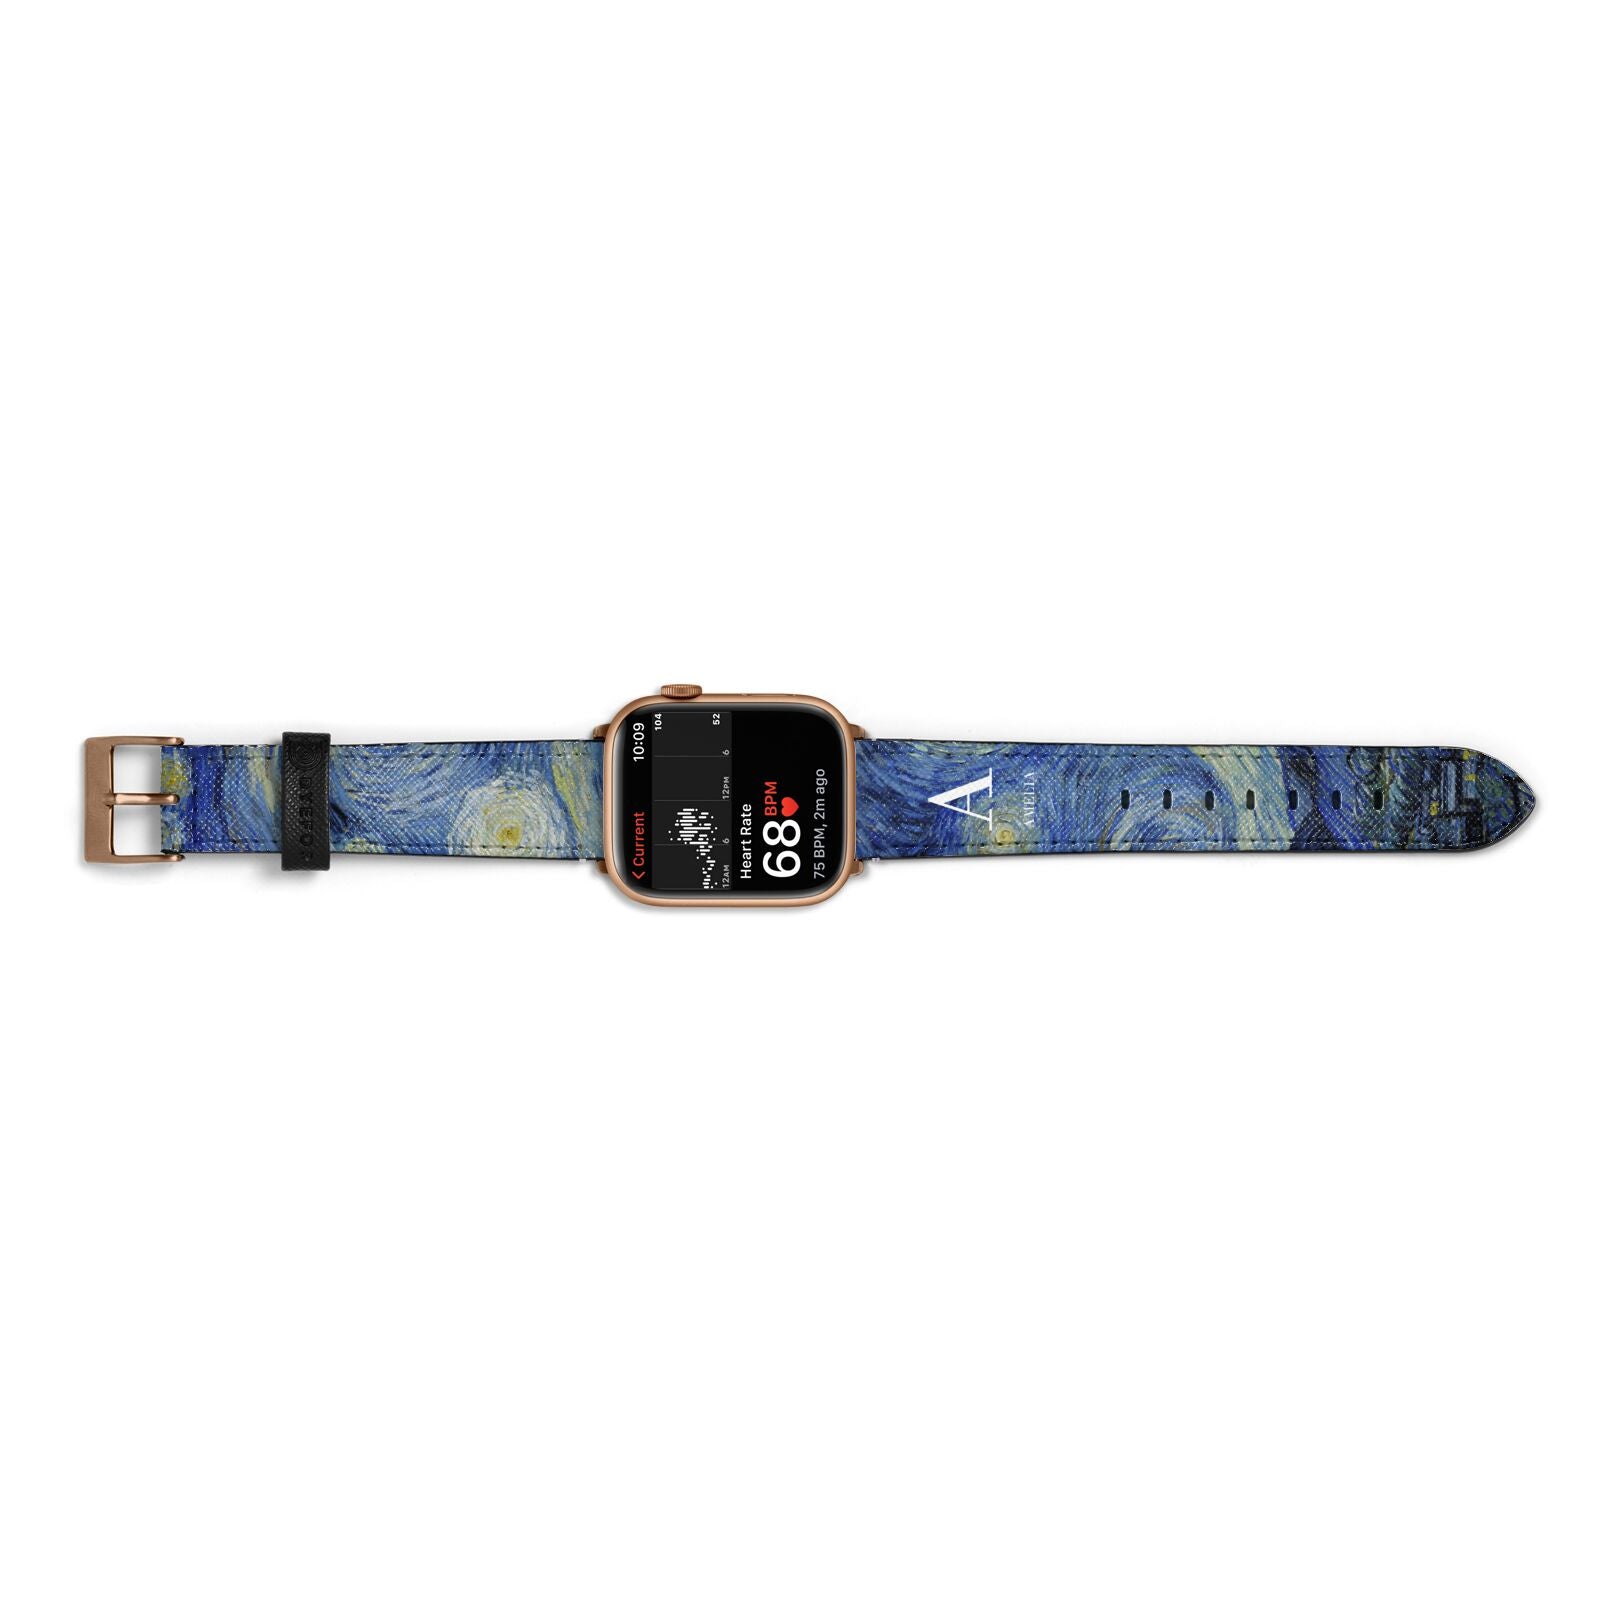 Personalised Van Gogh Starry Night Apple Watch Strap Size 38mm Landscape Image Gold Hardware